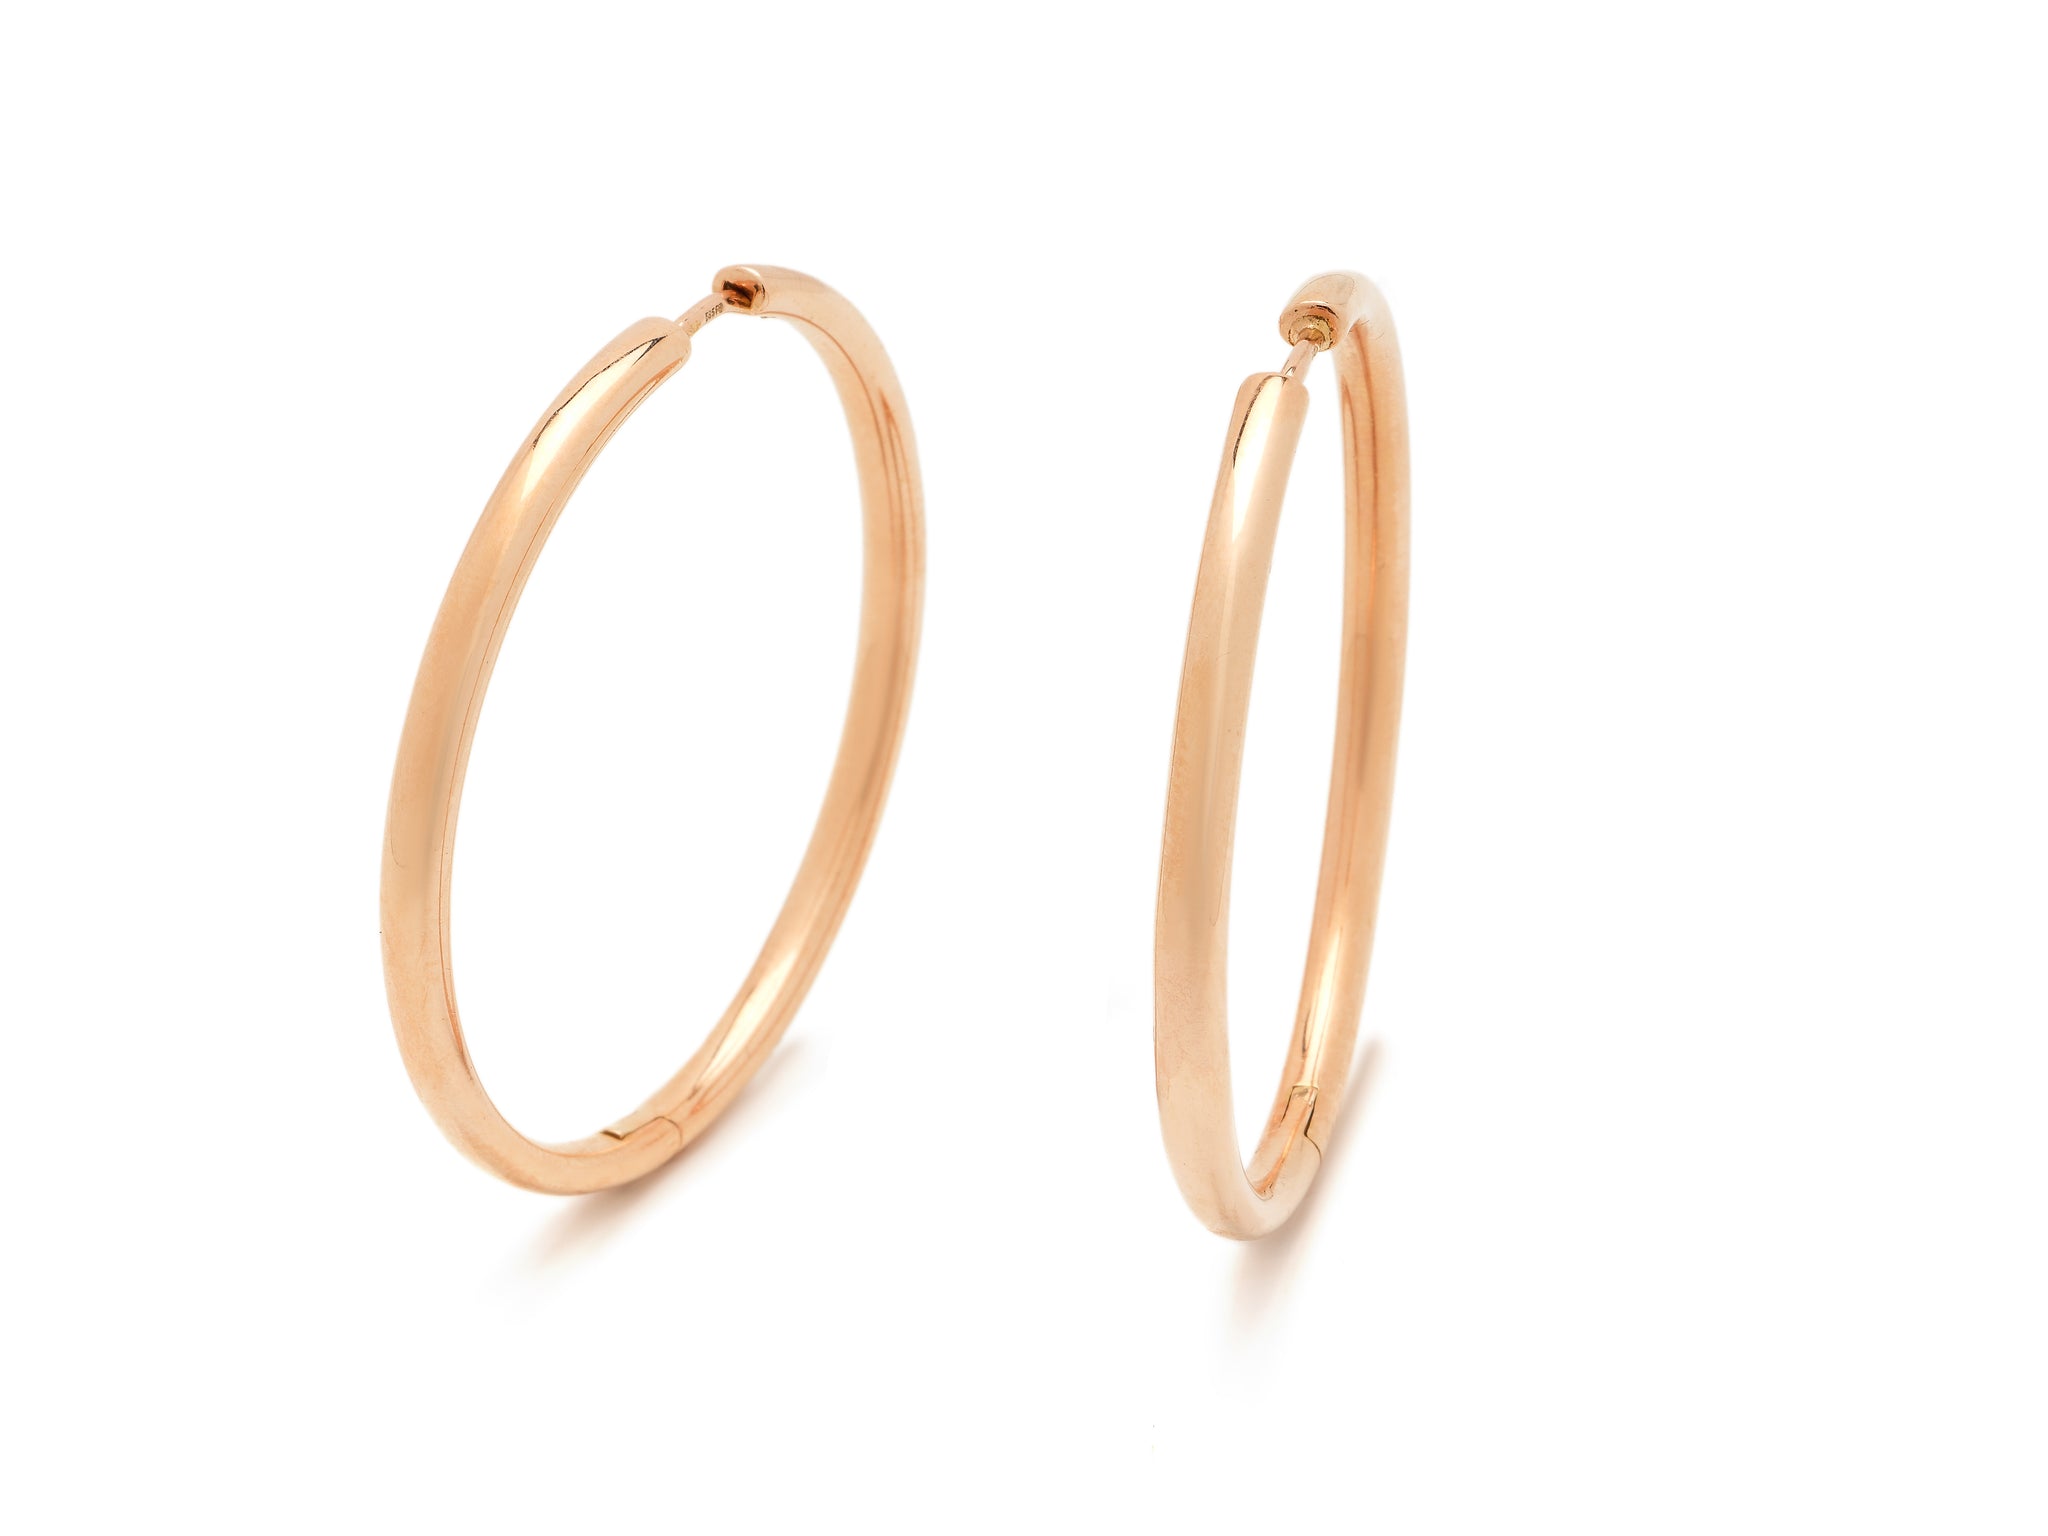 14 krt red gold hoops small